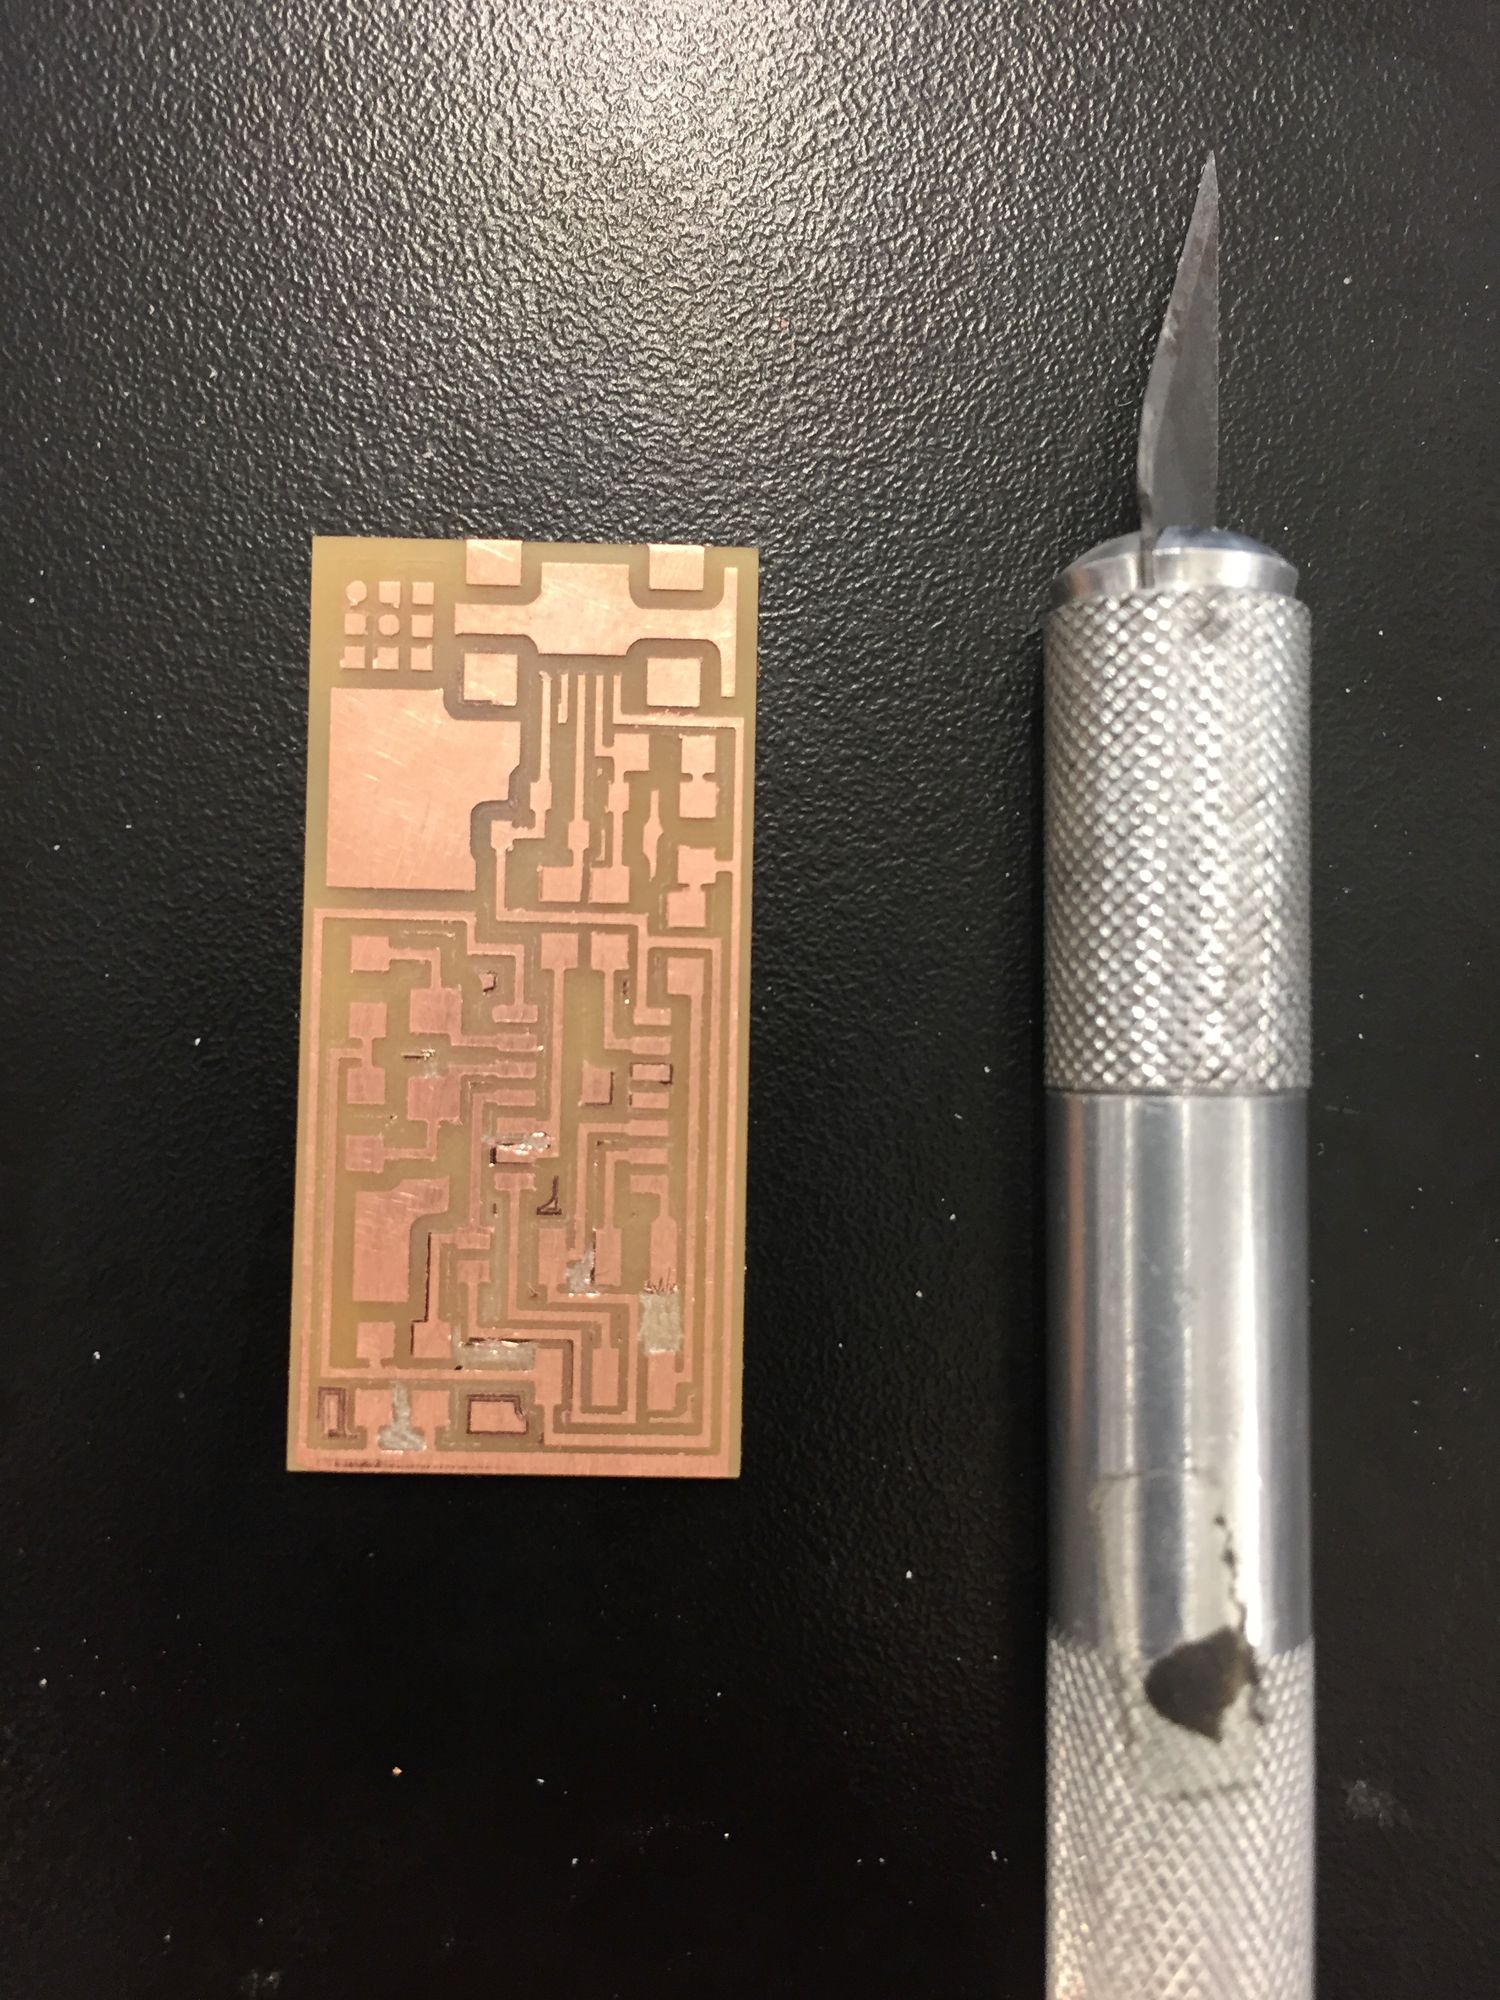 Copper circuit board and an X-Acto knife against a dark background